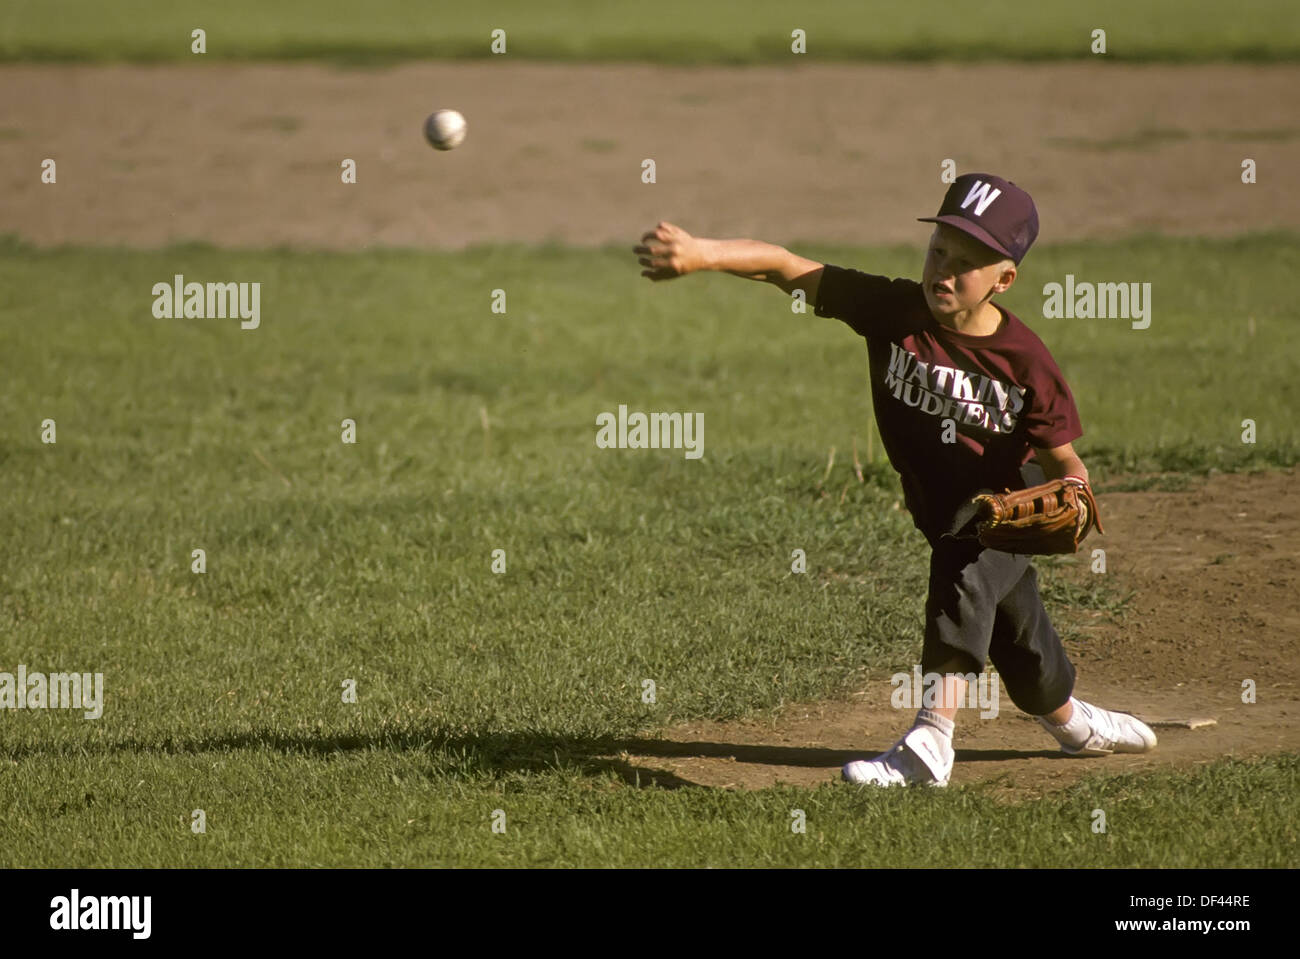 10 year old boy playing little league baseball throwing a ball Stock Photo